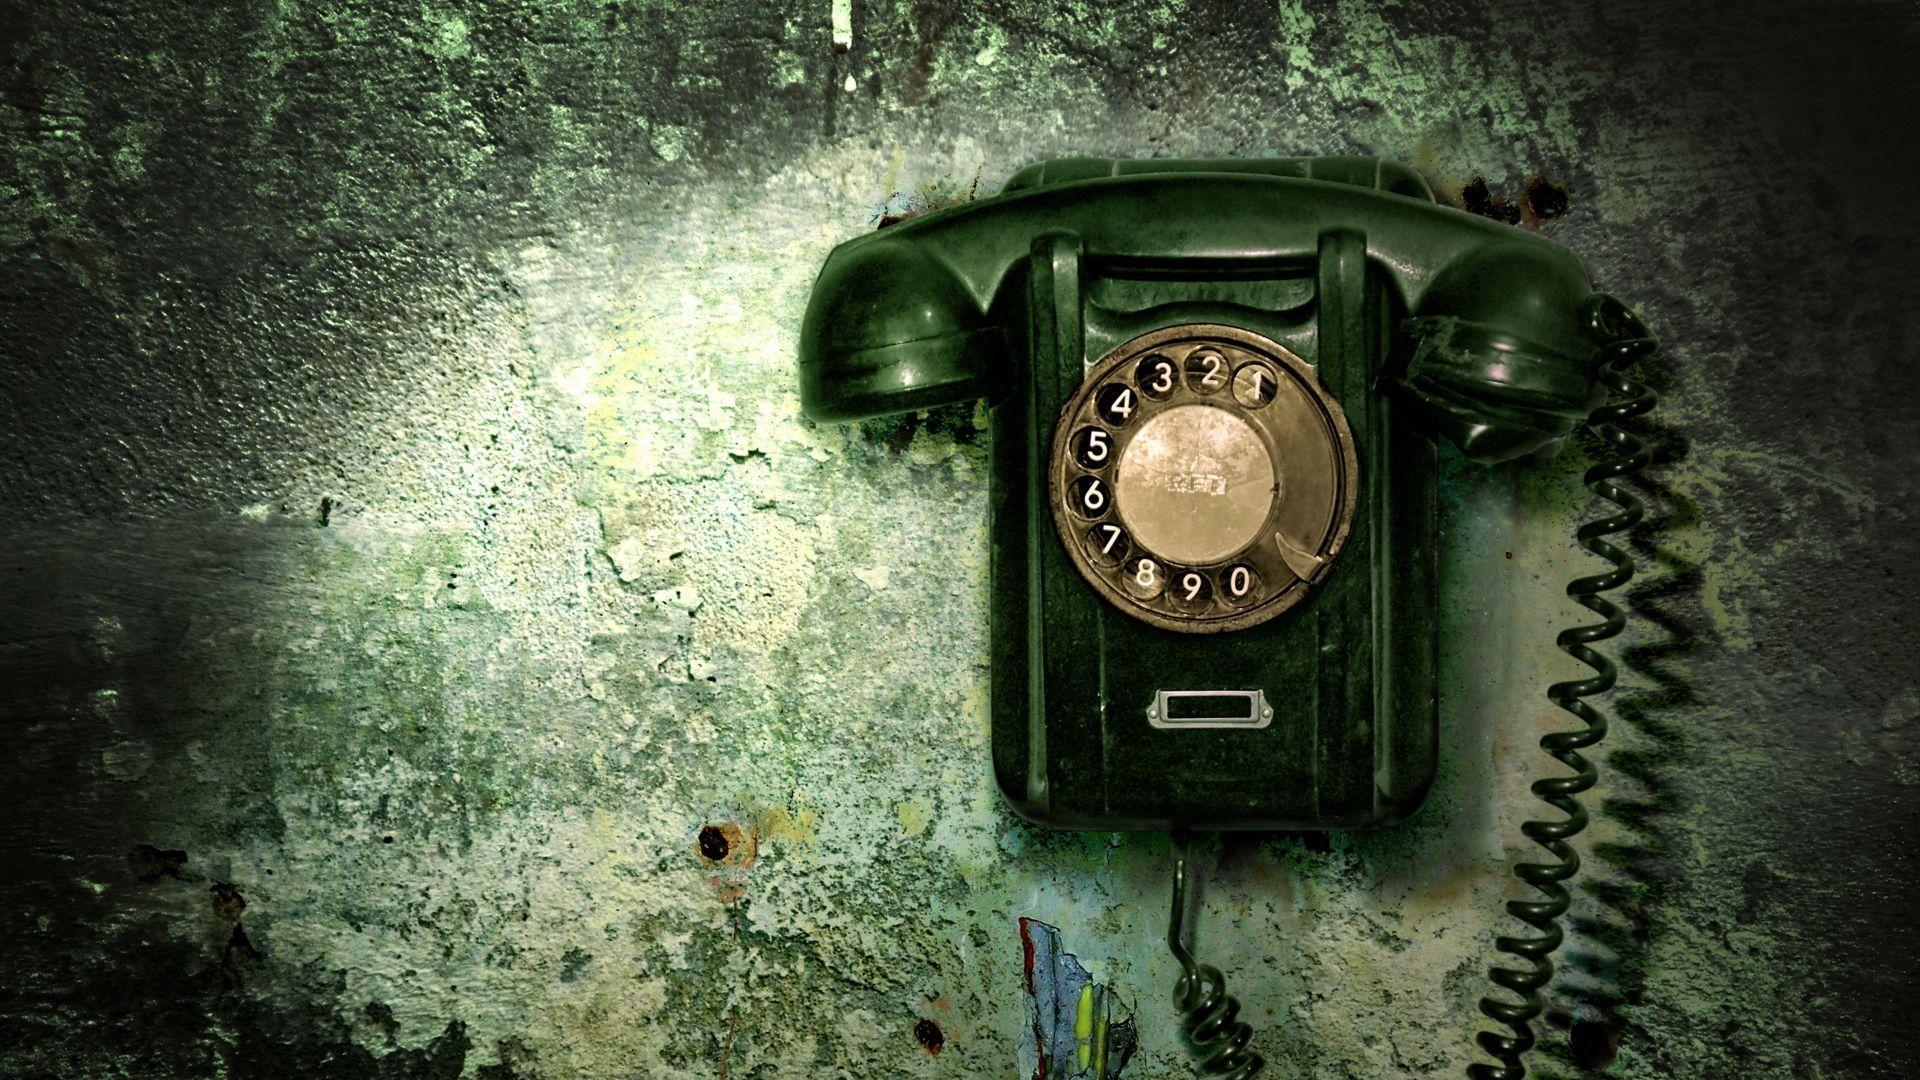 Telephone Wallpaper, 46 Telephone Image and Wallpaper for Mac